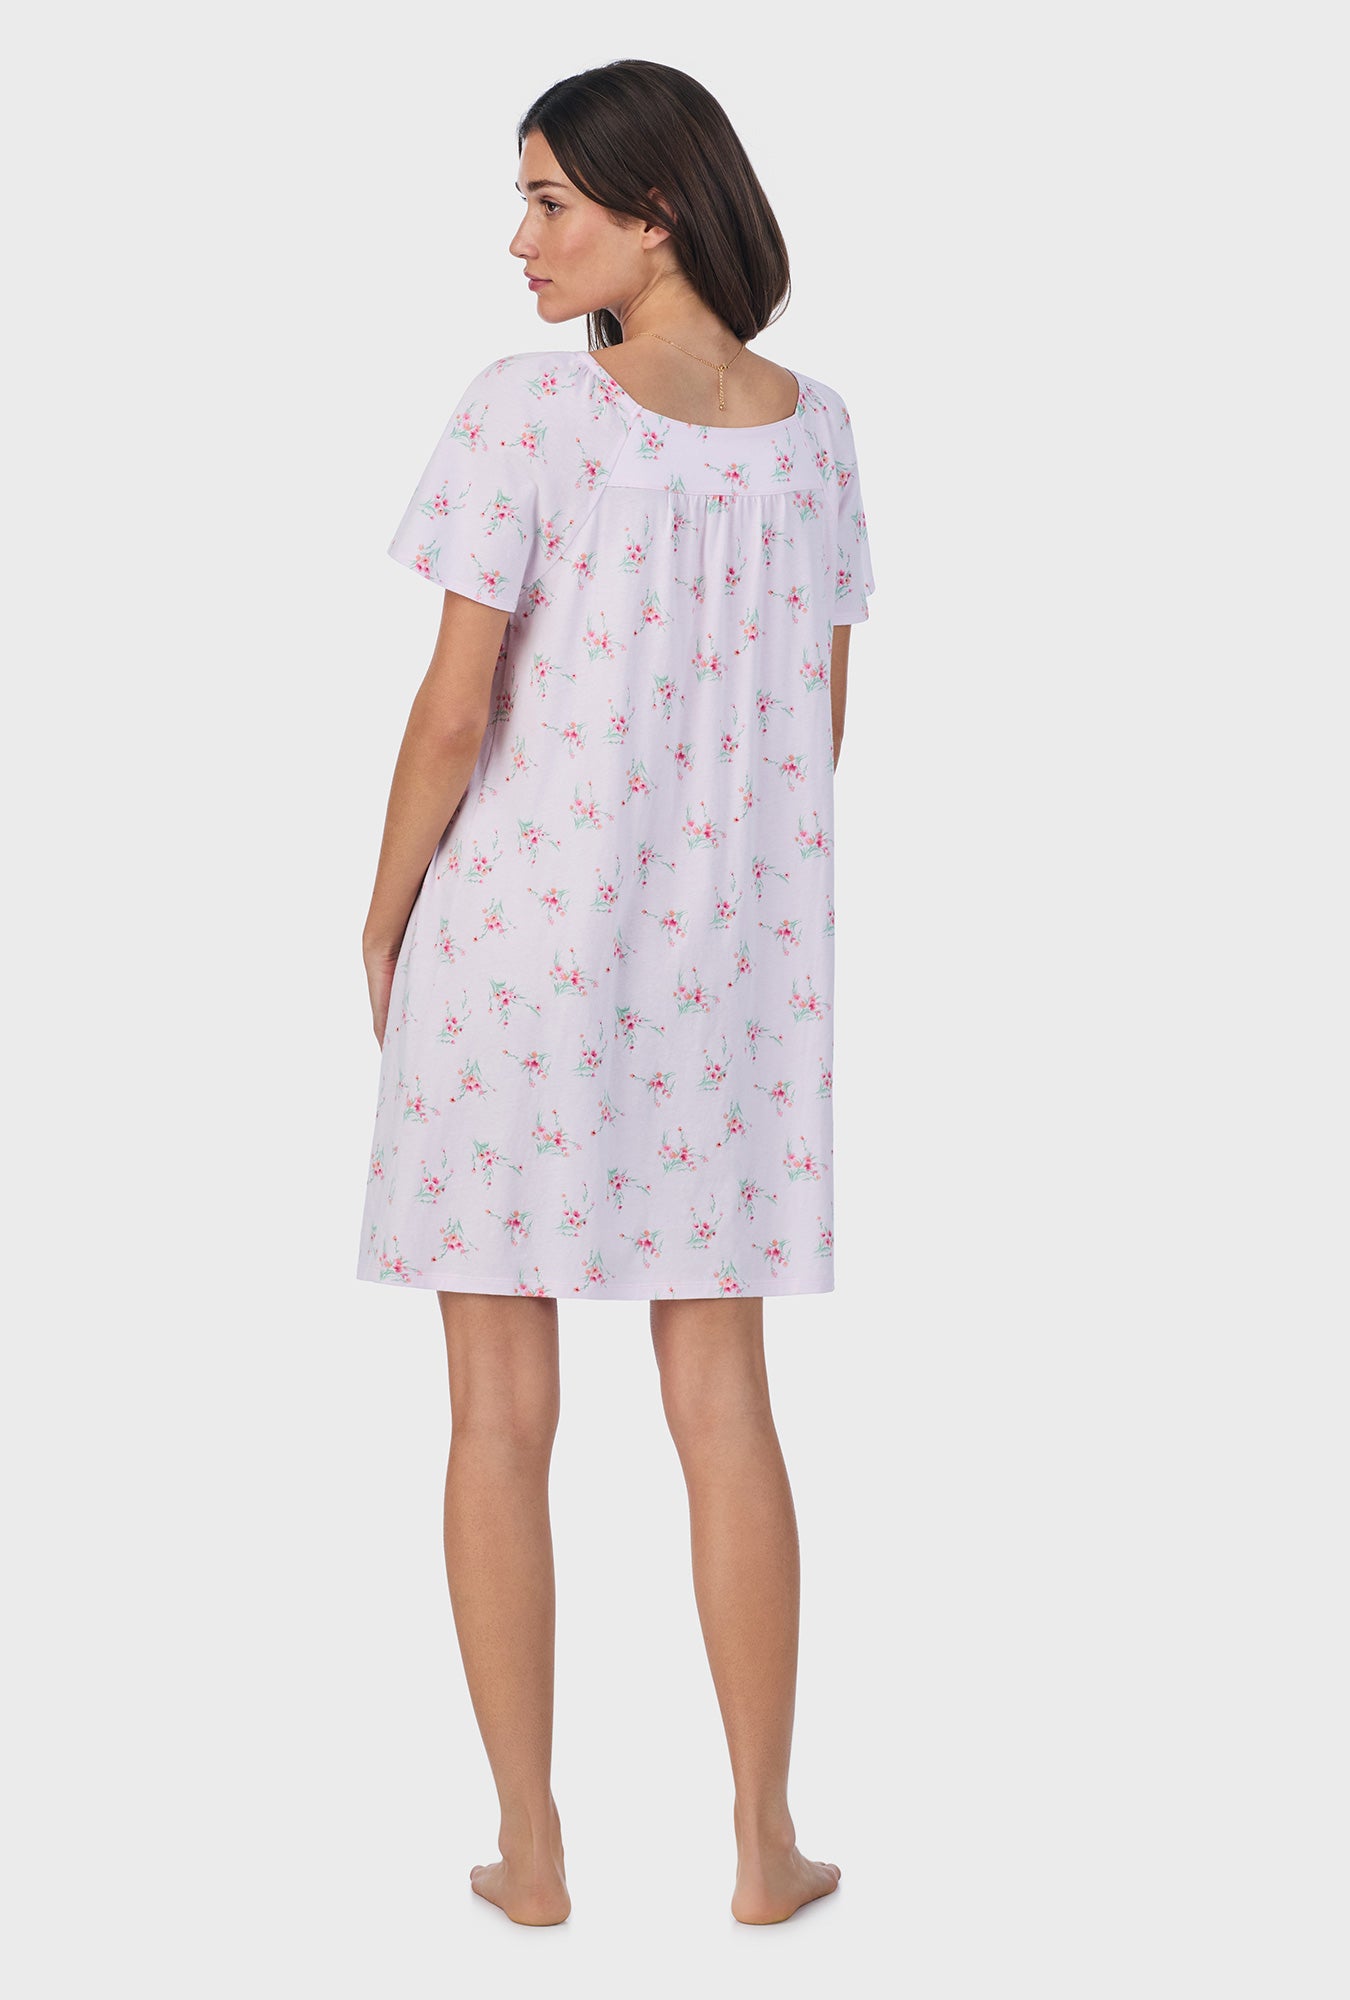 A lady wearing pink short sleeve cotton short nightgown with sweet blooms print.